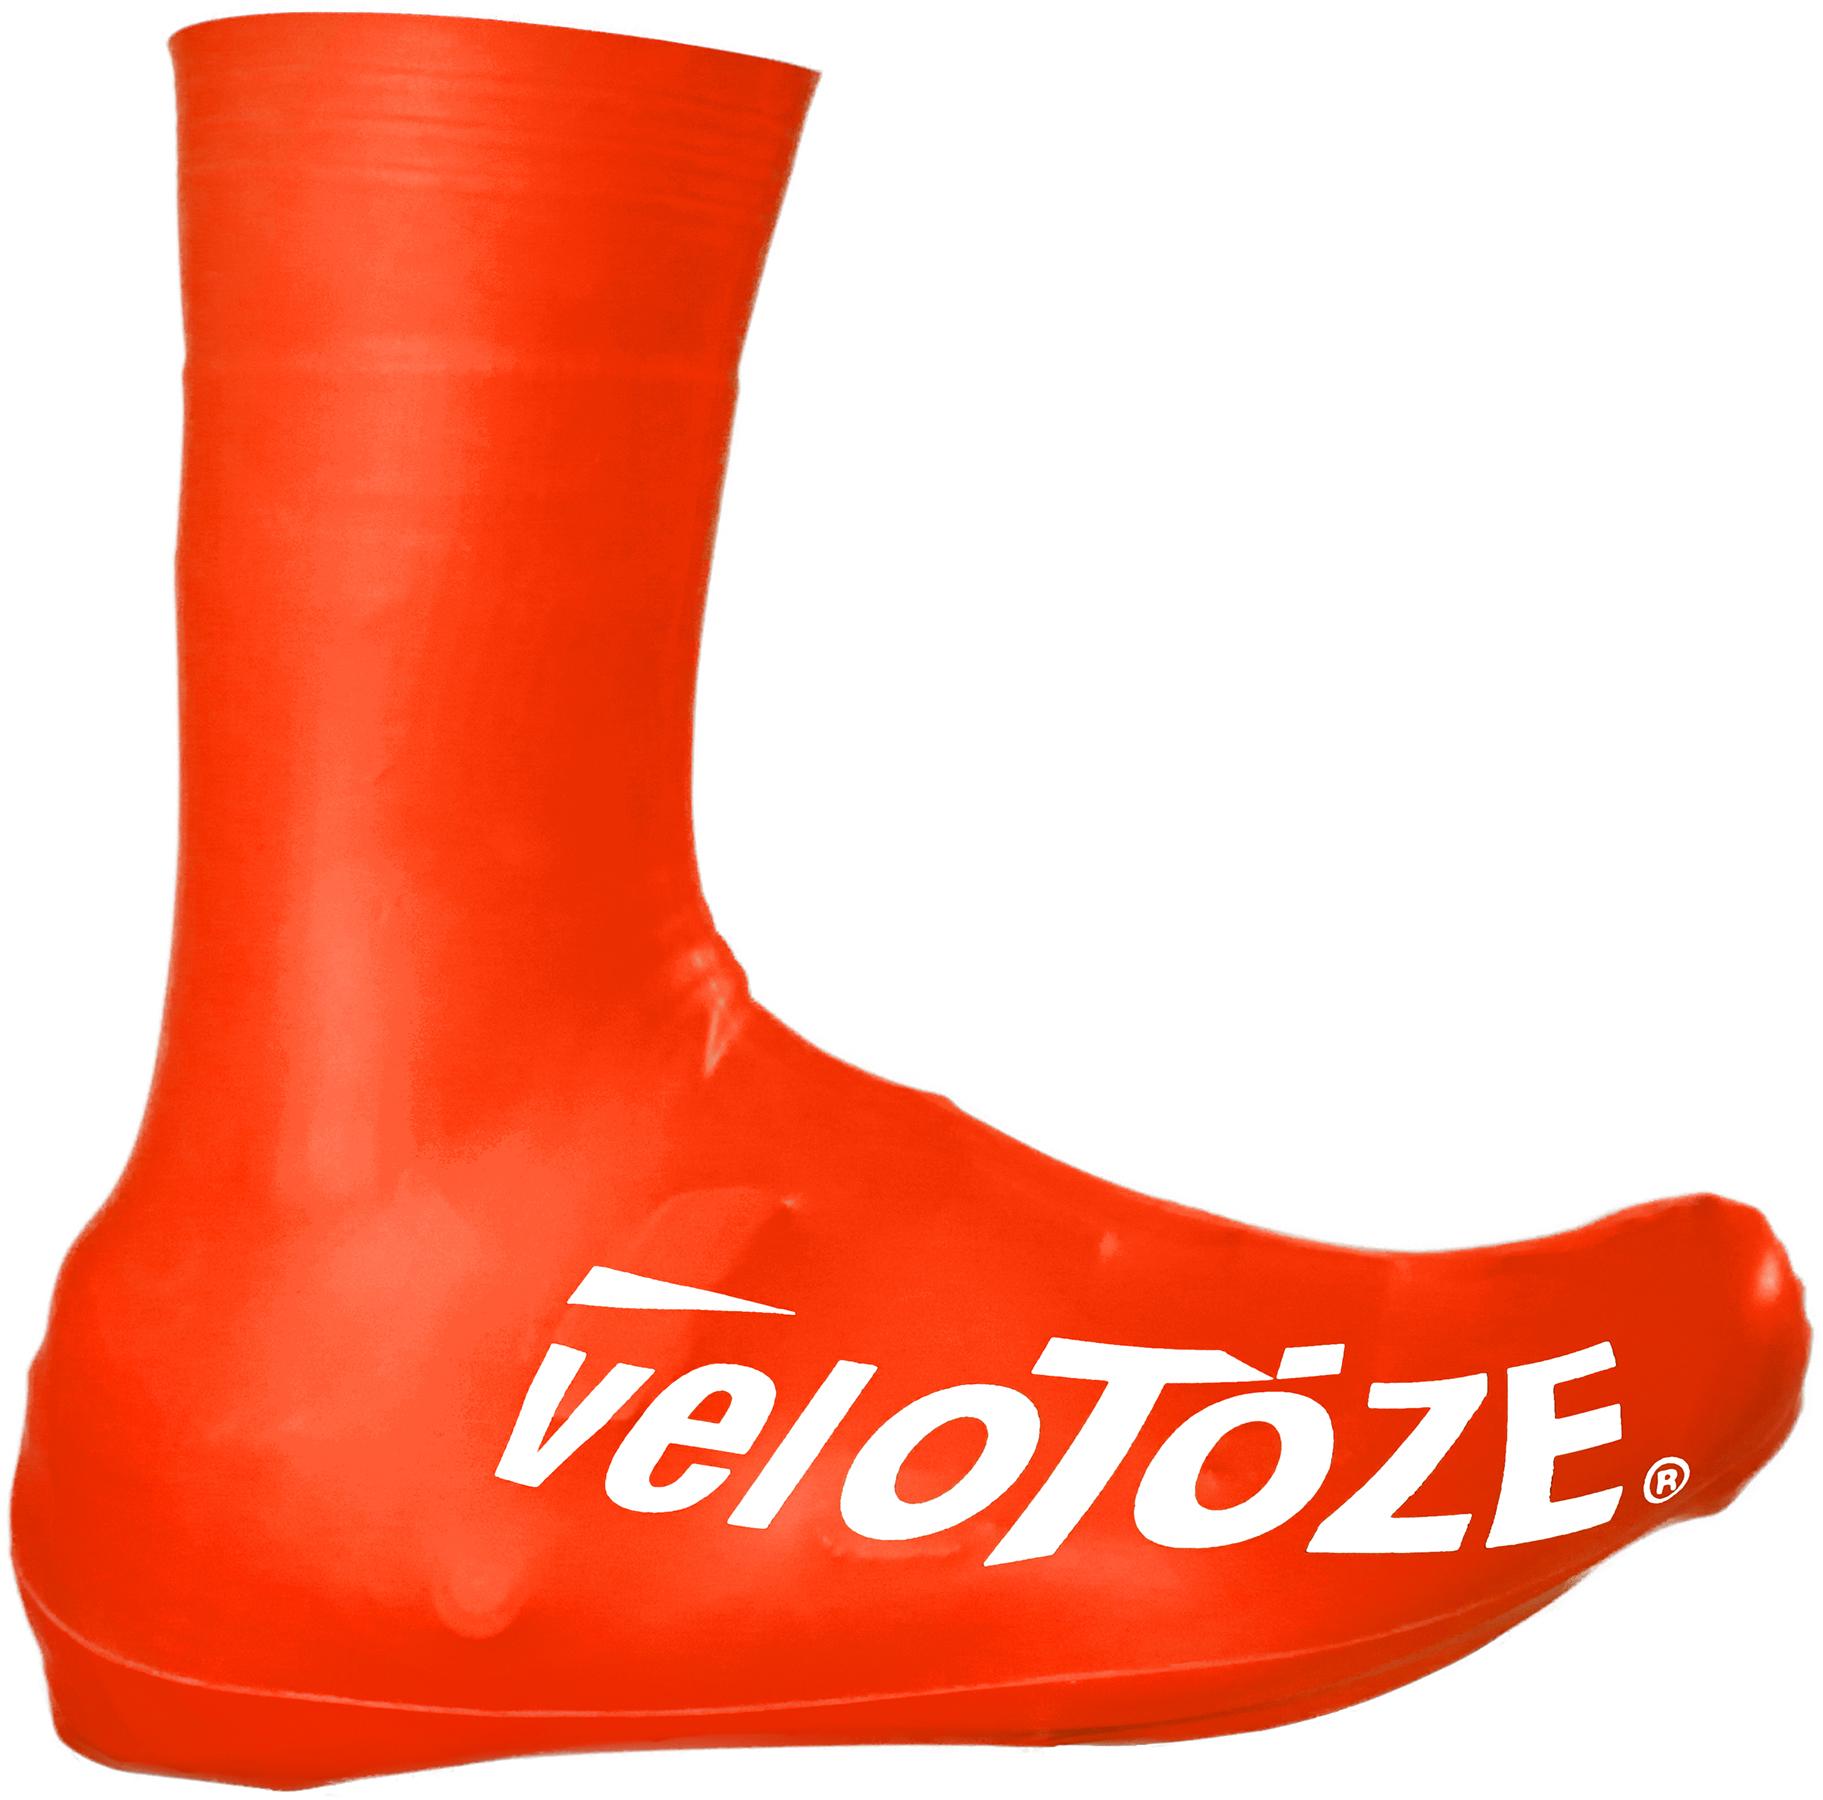 Velotoze Tall Shoe Covers 2.0 - Red